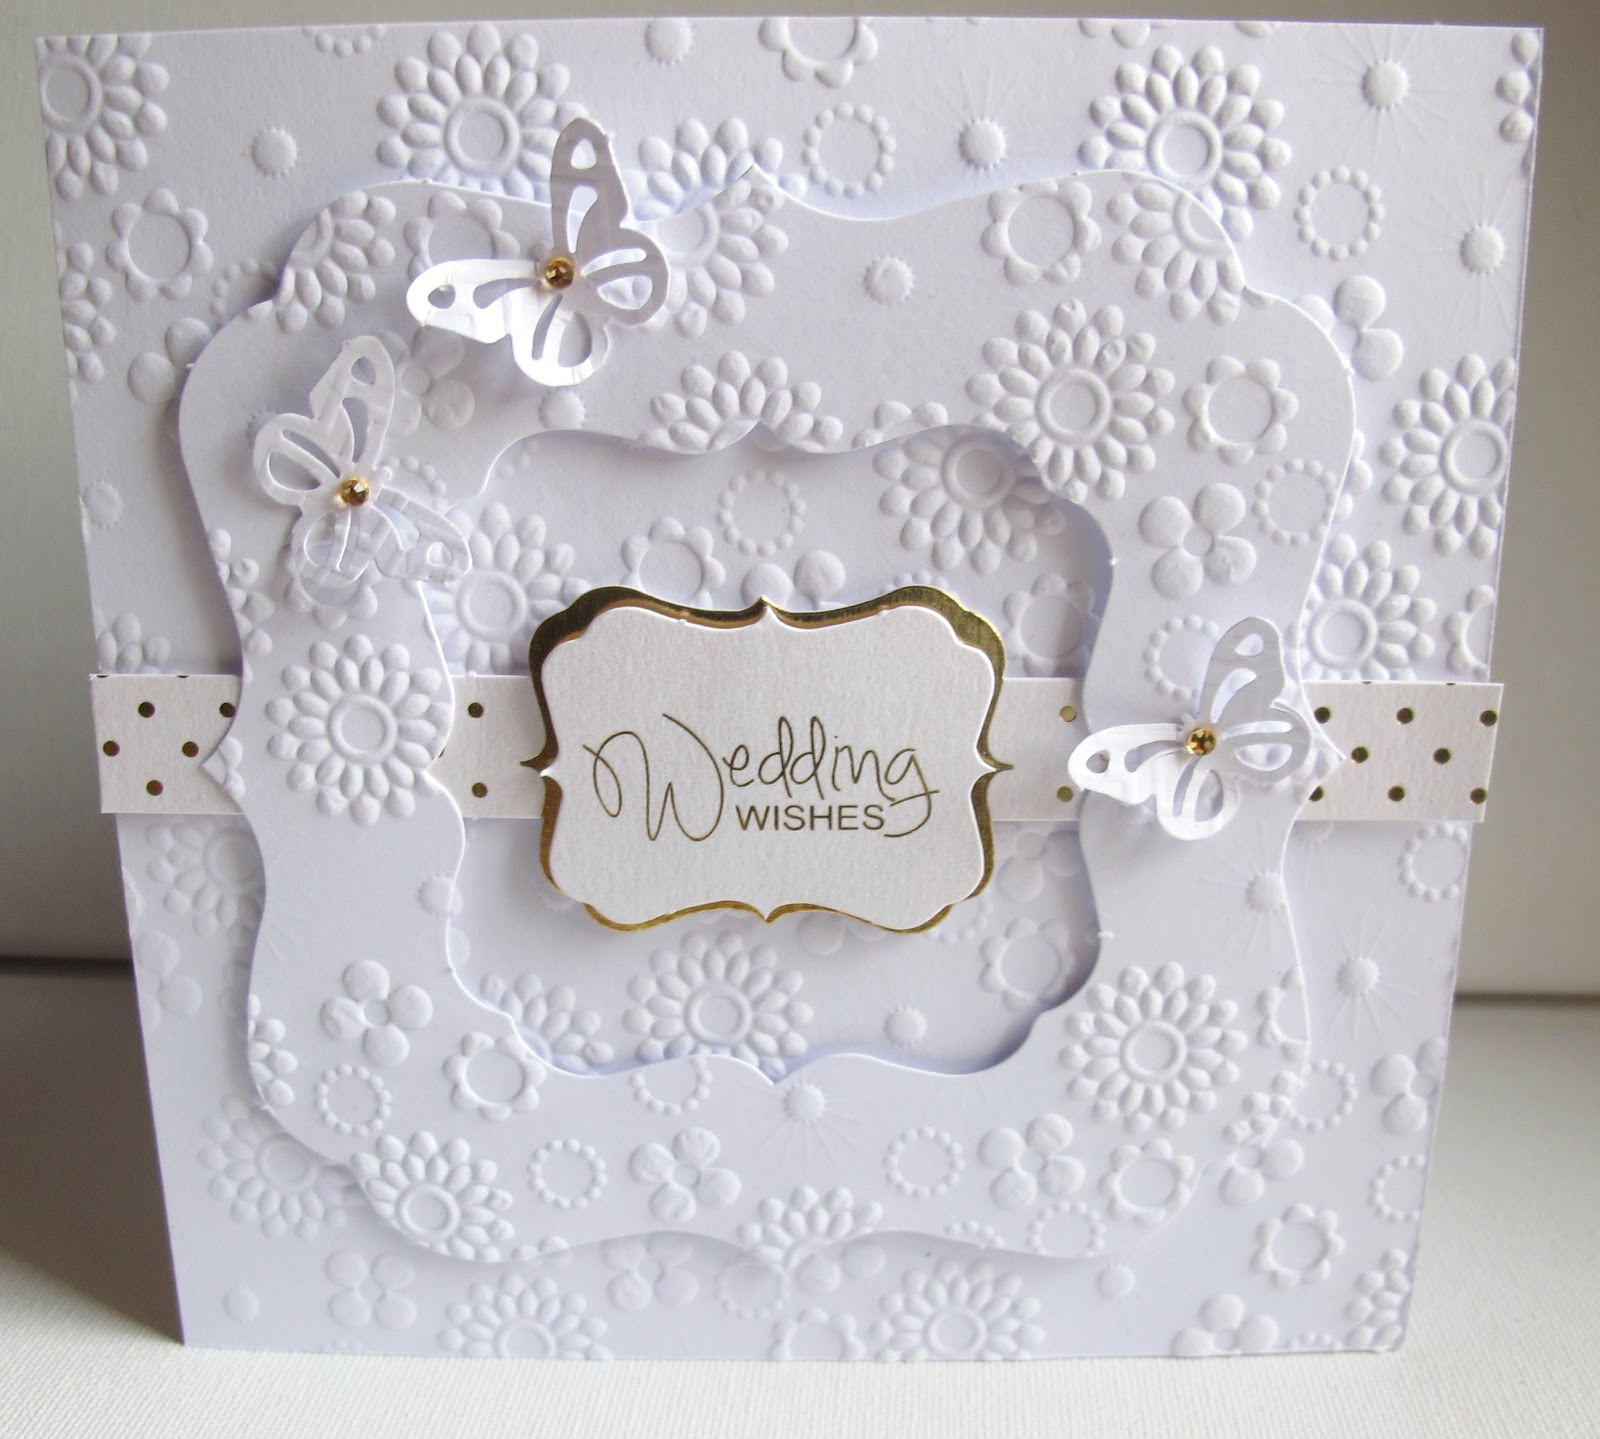 Download this Embossed Wedding Card picture